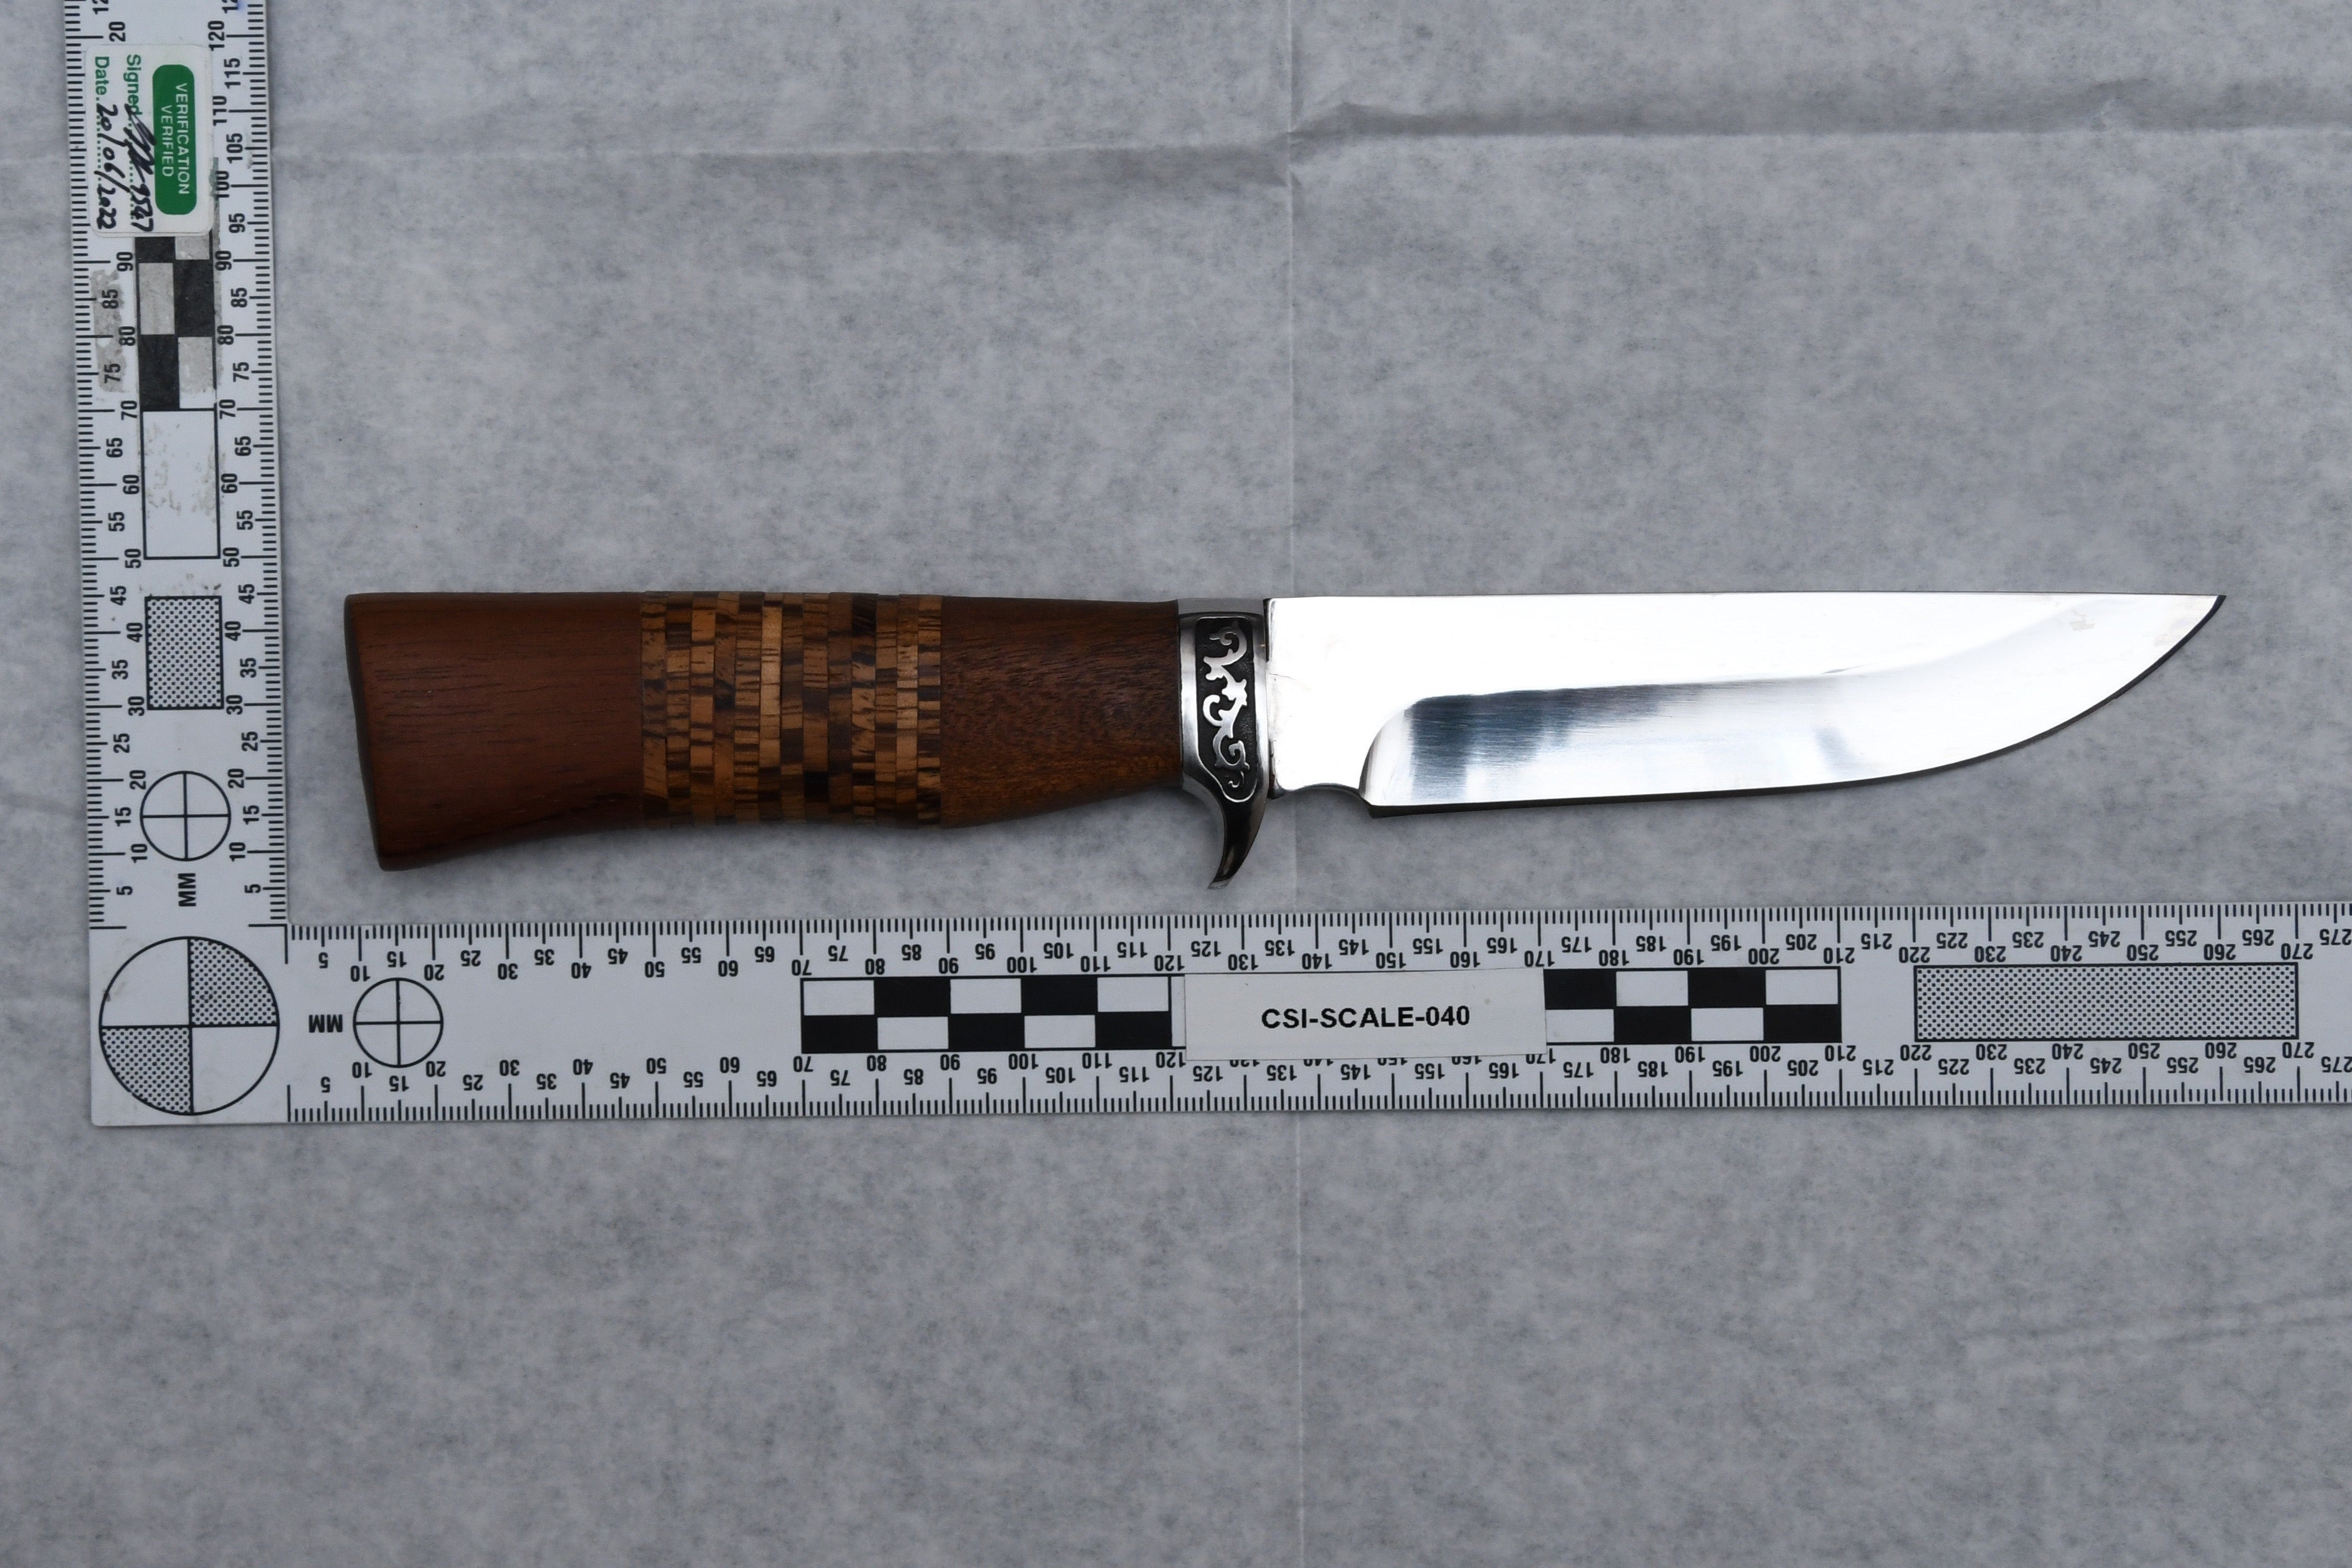 The hunting knife used in the attack